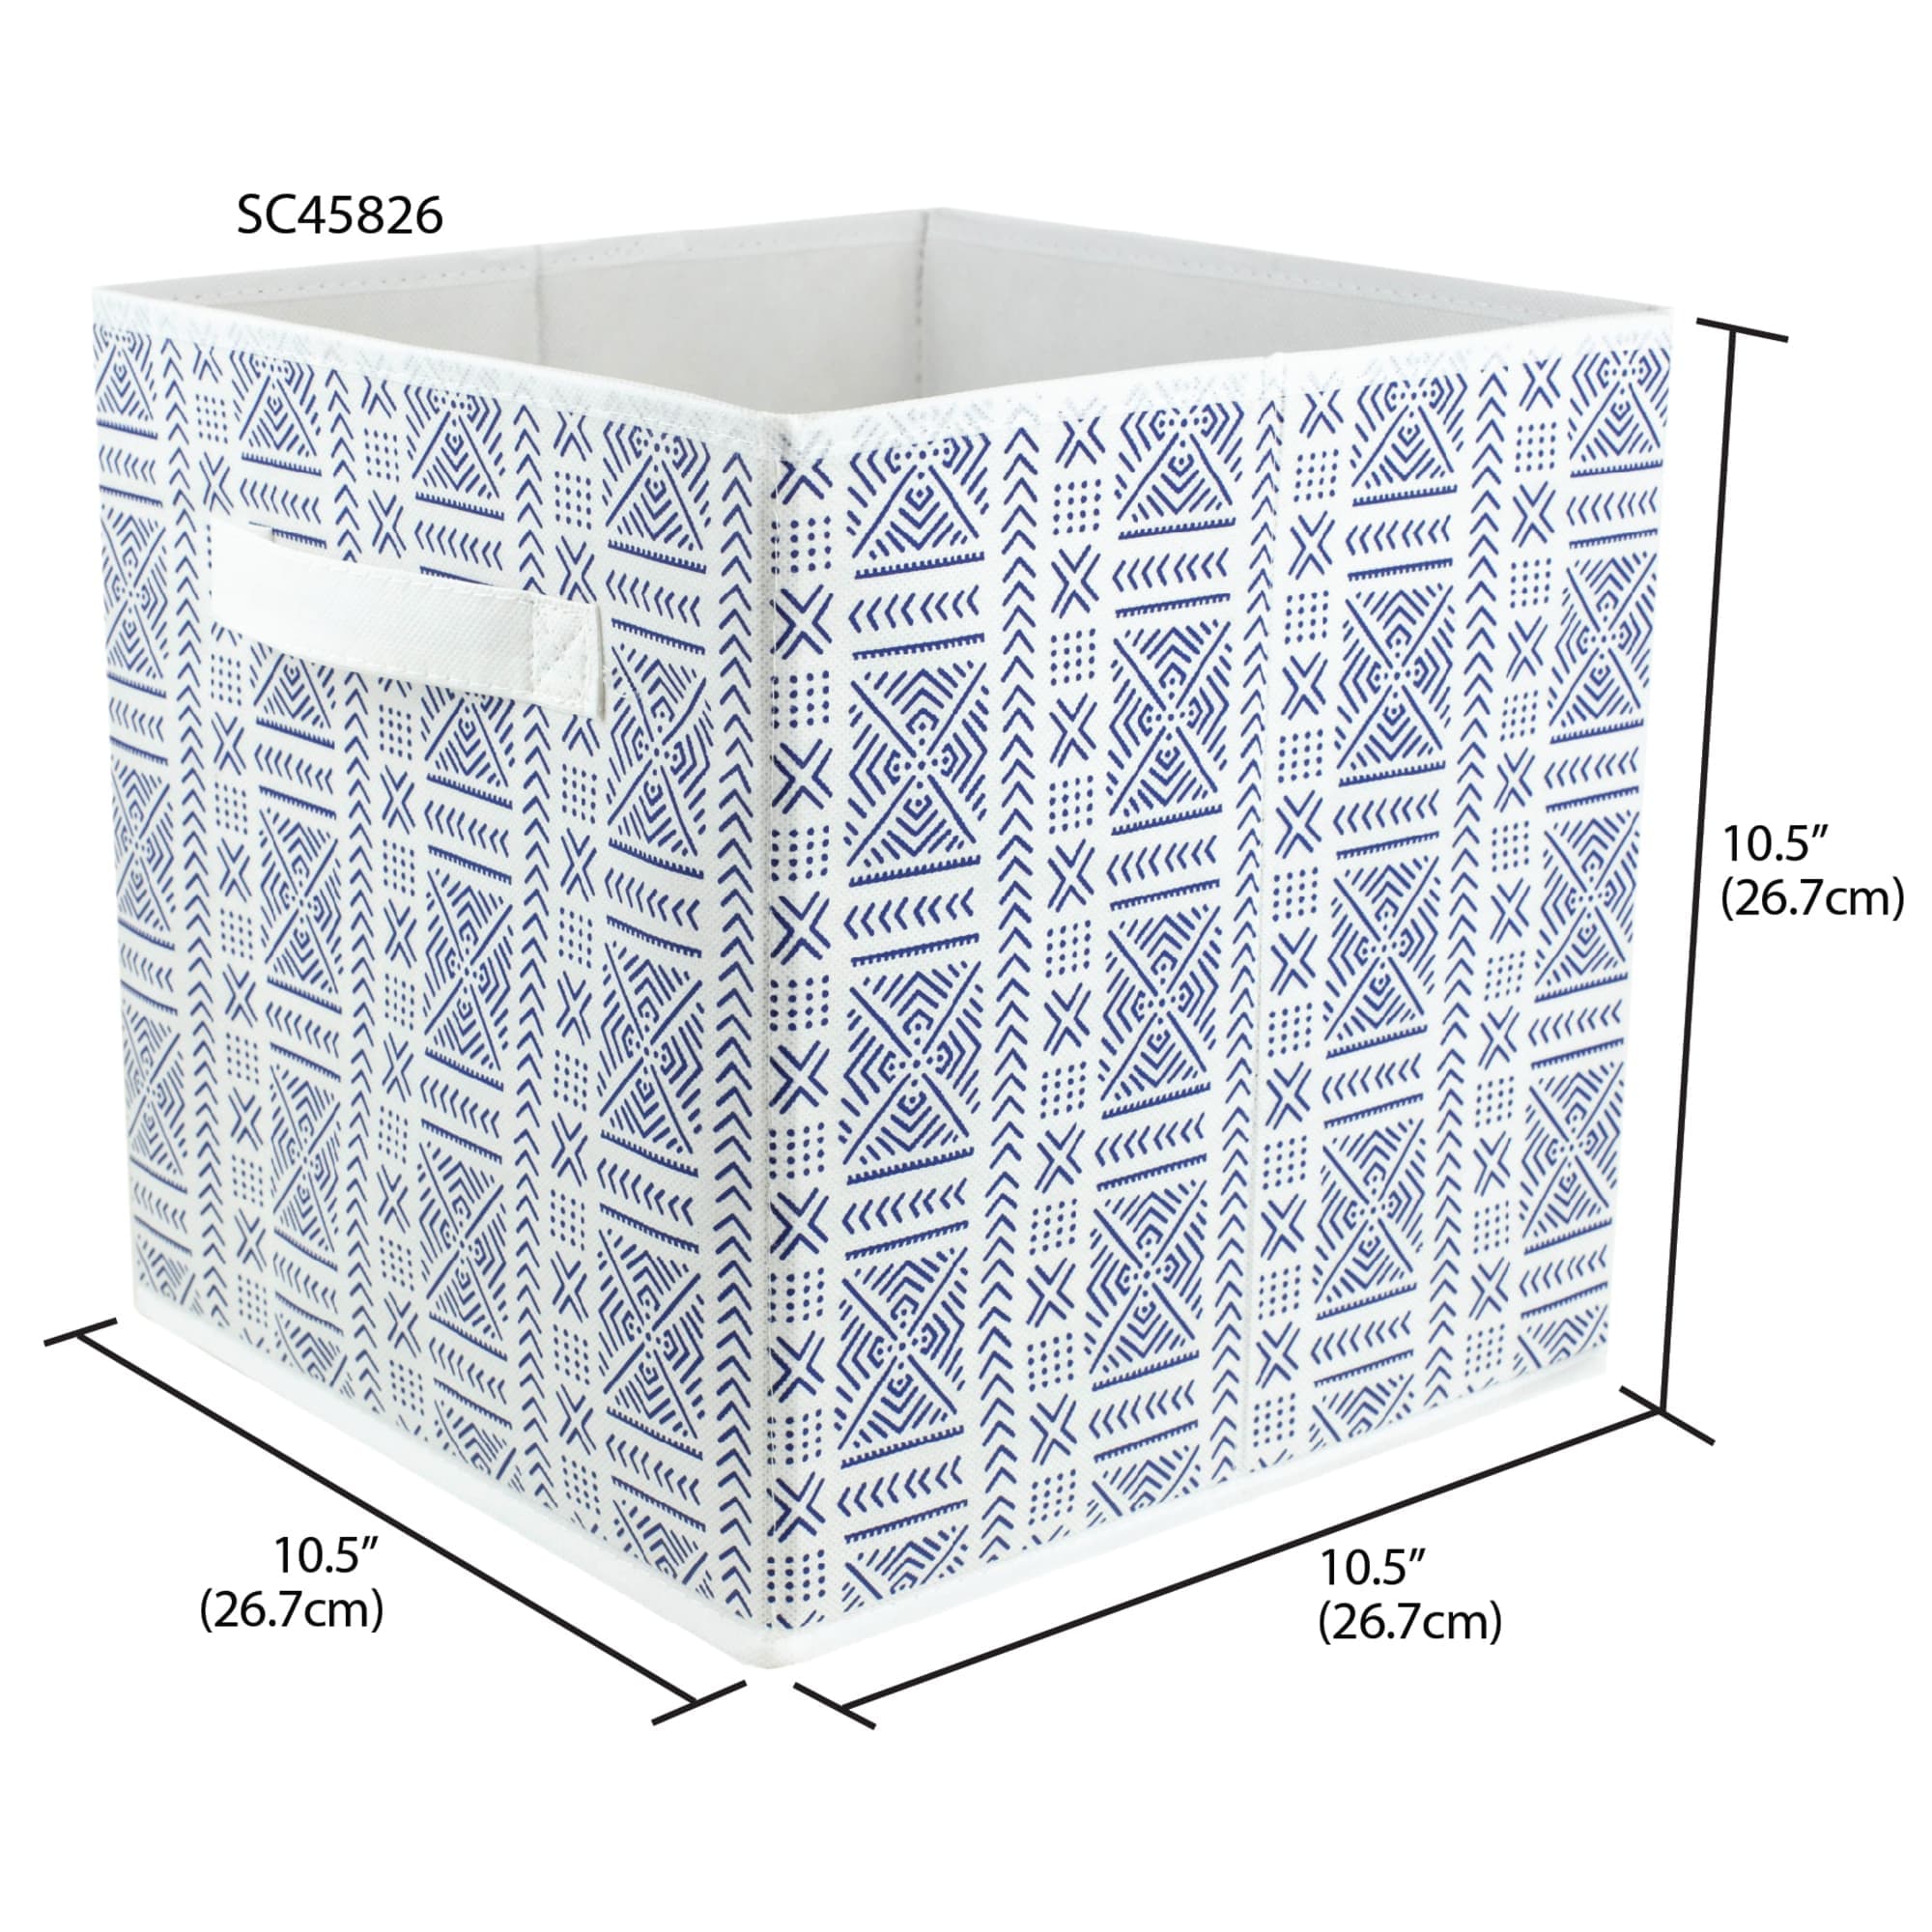 Home Basics Aztec Collapsible Non-Woven Storage Cube, Navy $3.00 EACH, CASE PACK OF 12